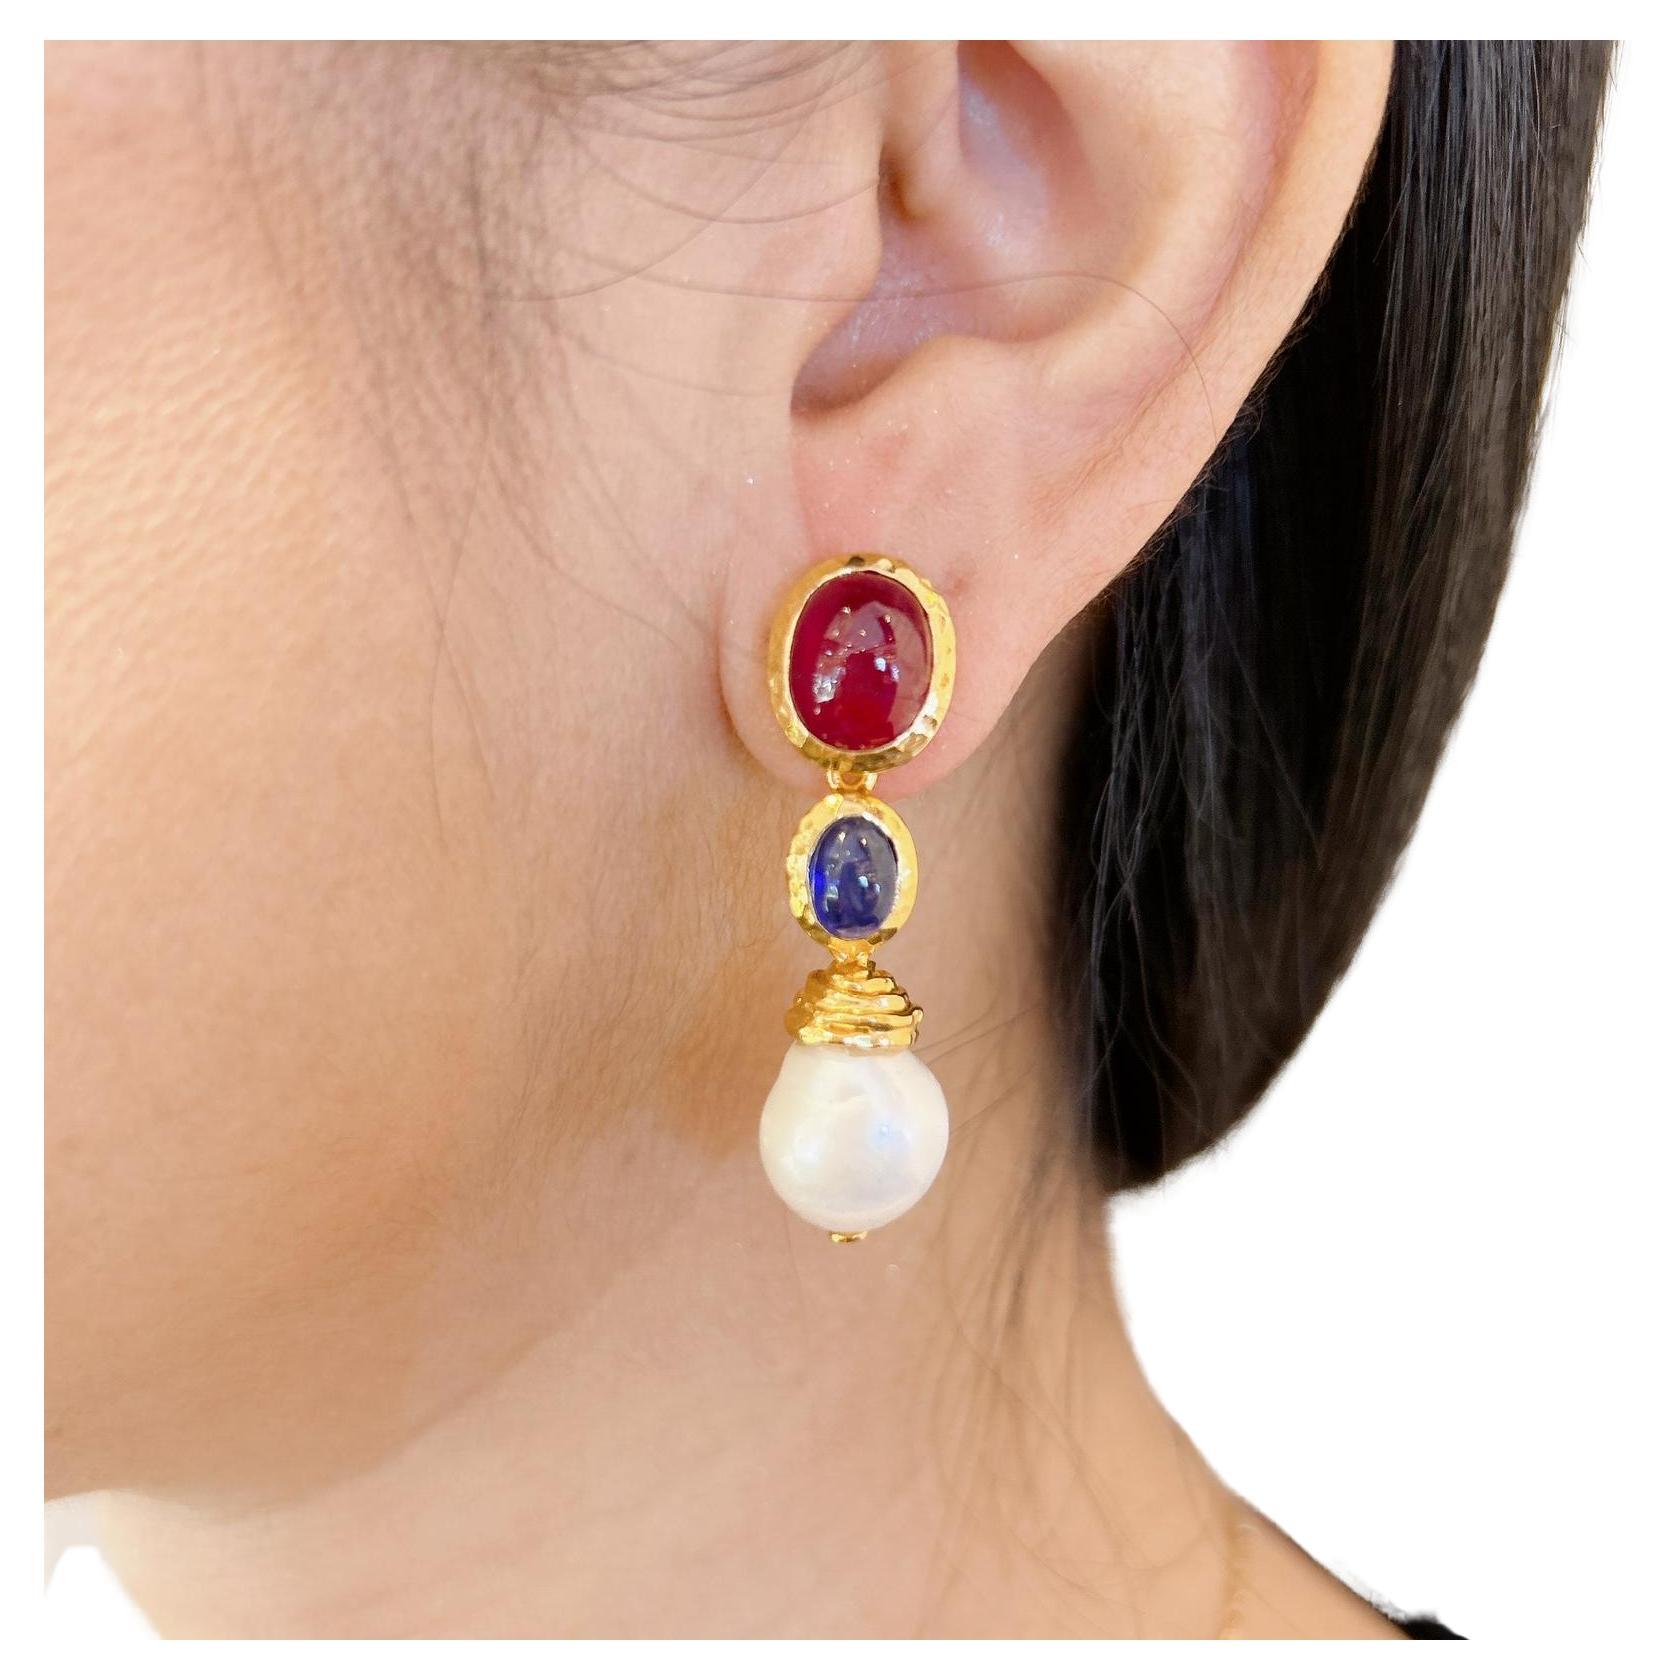 Bochic “Capri” Red Ruby & Blue Sapphire Earrings Set in 22K Gold & Silver 
Natural Red Rubis - 17 carats
Cabochon shape 
Natural Blue Color Sapphires from Sri Lanka  - 8 carats 
Set in 22K Gold and Silver 950
This Earrings are perfect to wear - Day